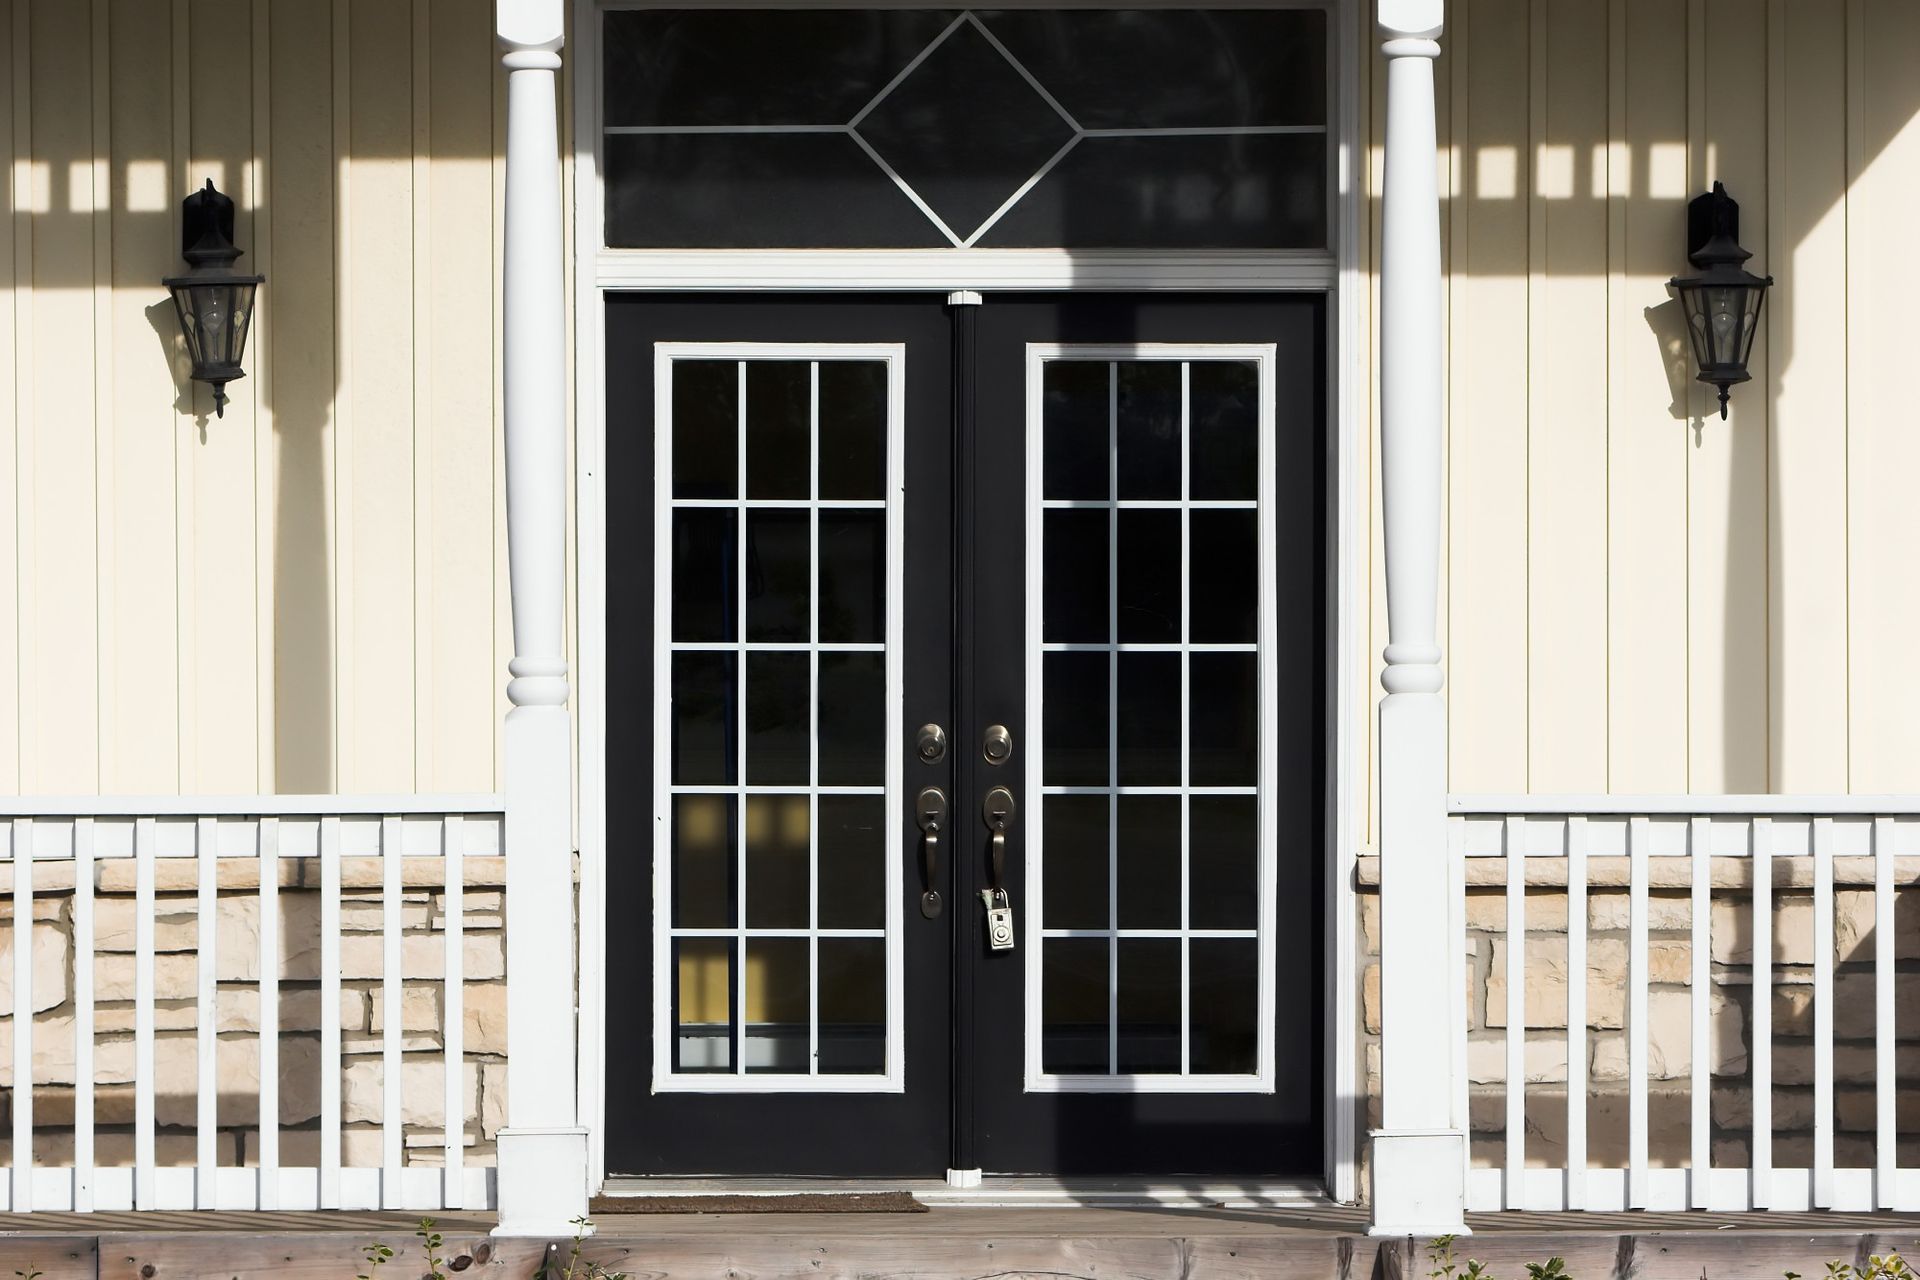 Before Adding a French Door to Your Home What Should You Consider